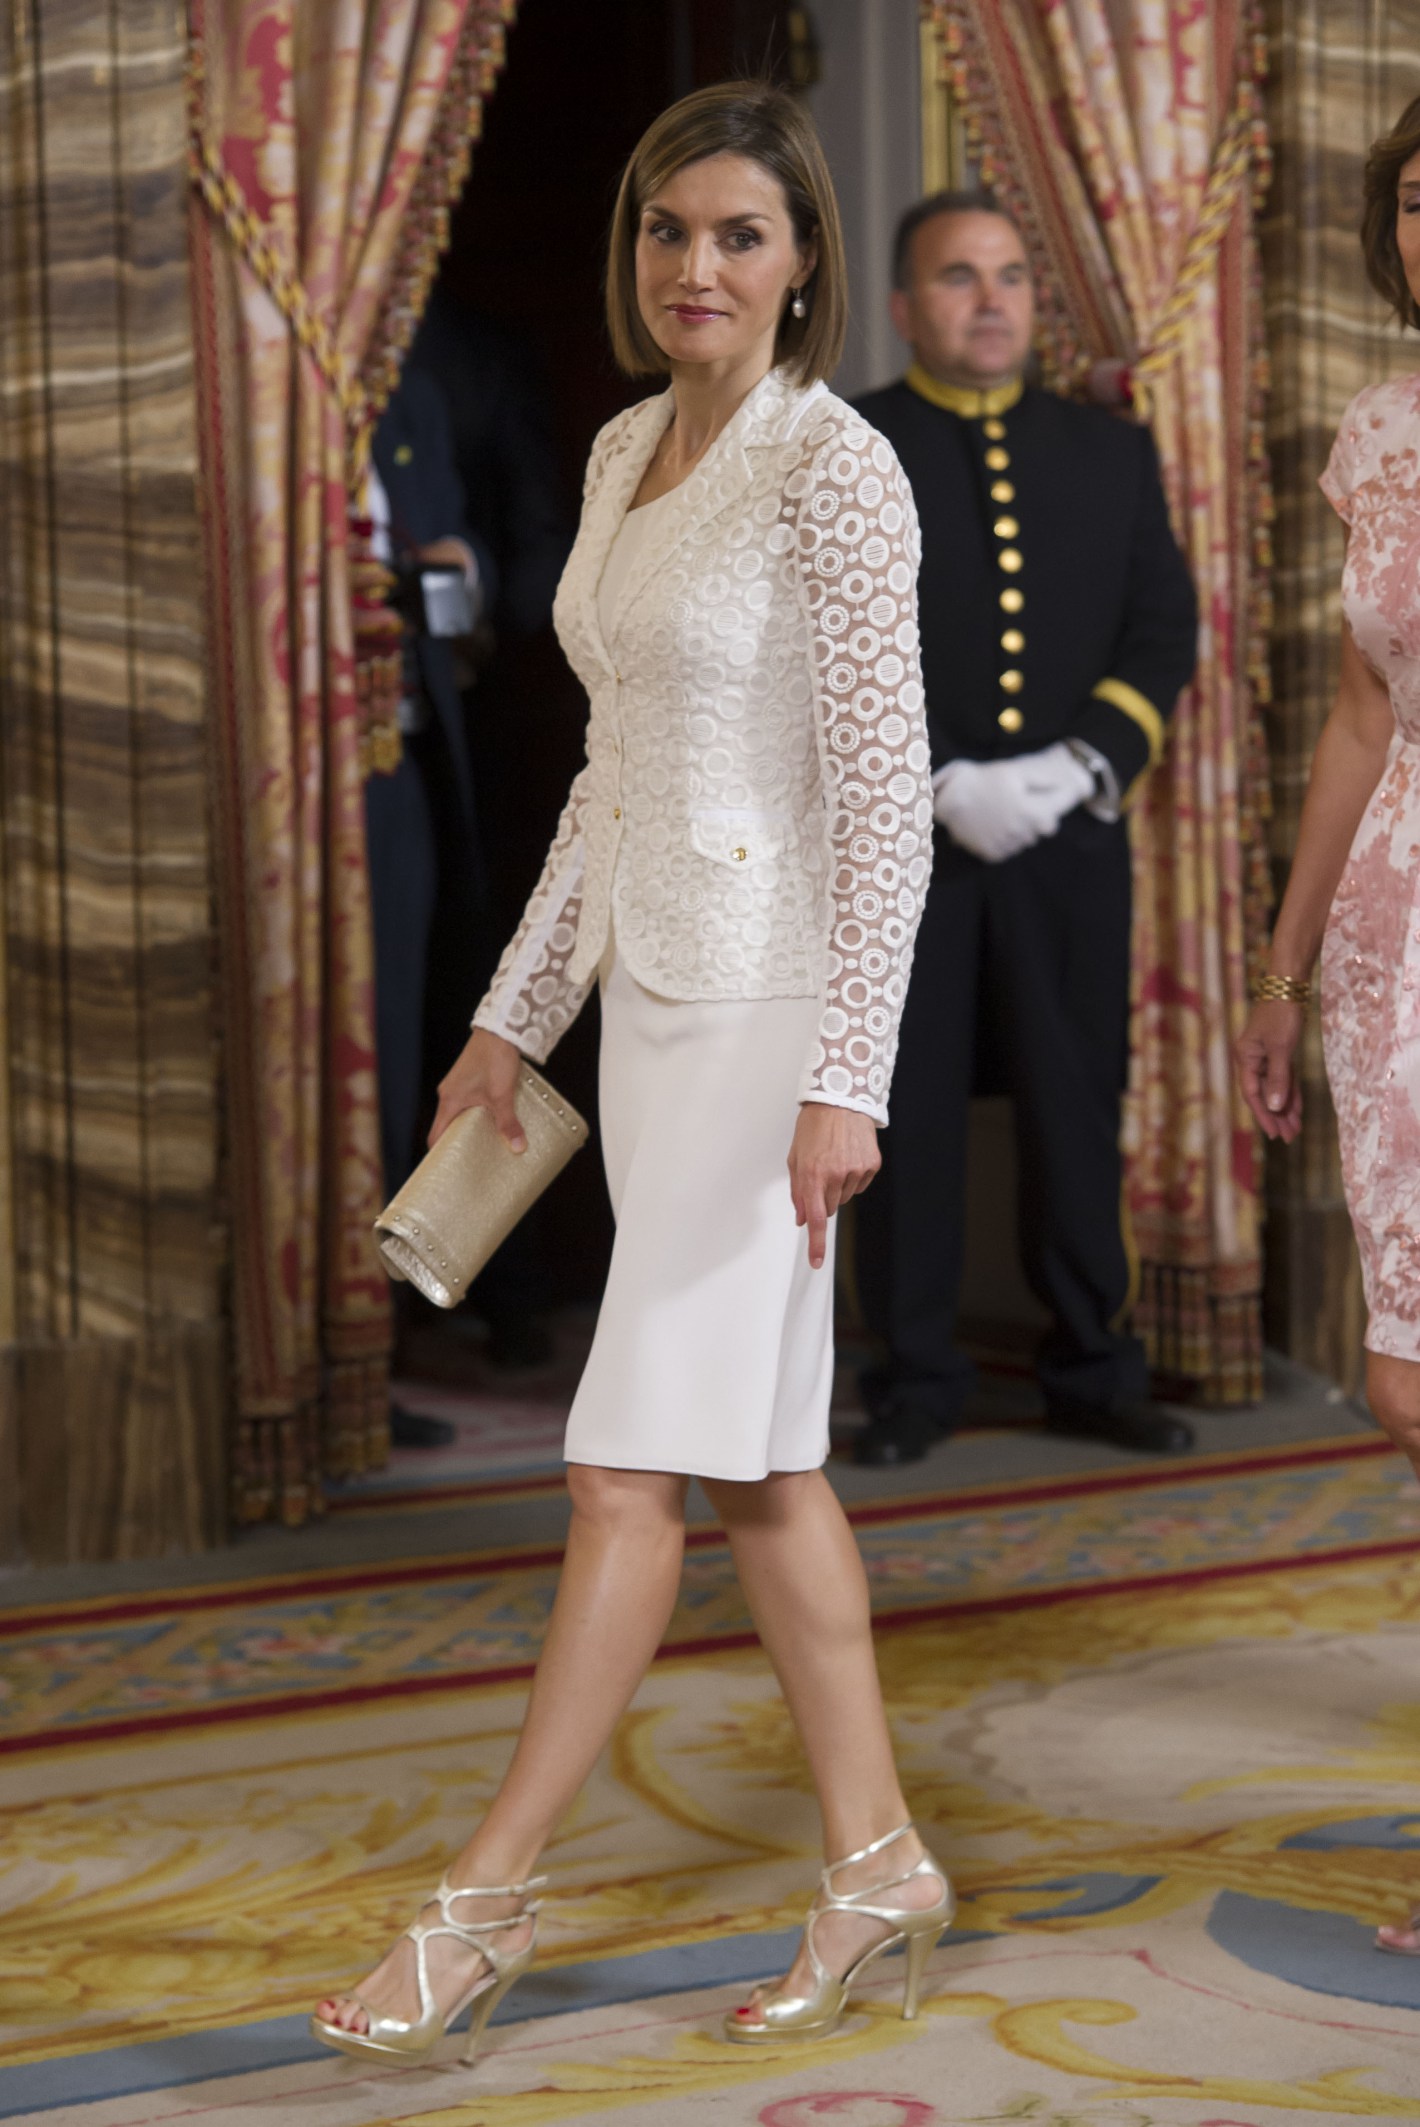 Mandatory Credit: Photo by MediaPunch/REX/Shutterstock (4902834a) Queen Letizia Romanian President Klaus Werner Iohannis visit to Madrid, Spain - 13 Jul 2015